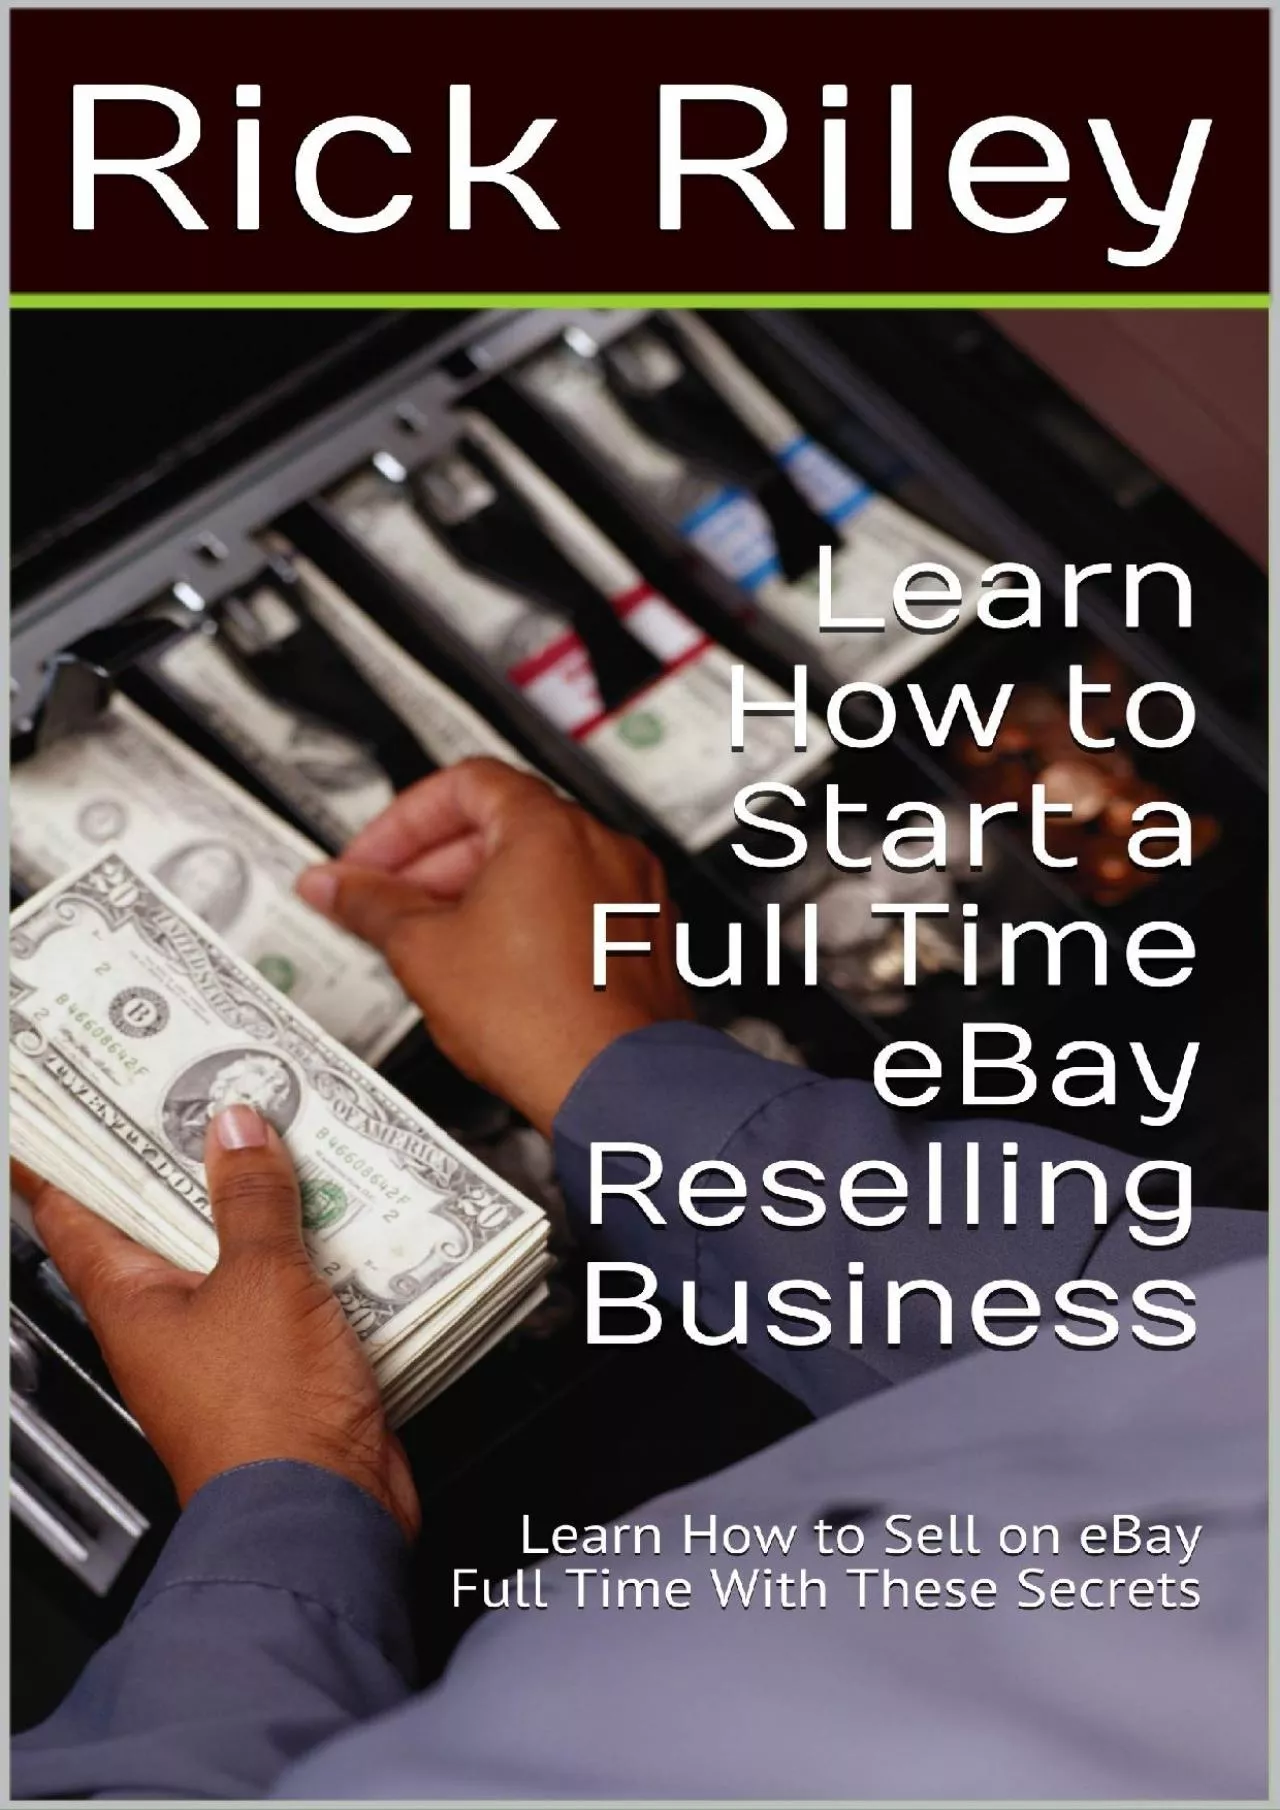 Learn How to Start a Full Time eBay Reselling Business Learn How to Sell on eBay Full